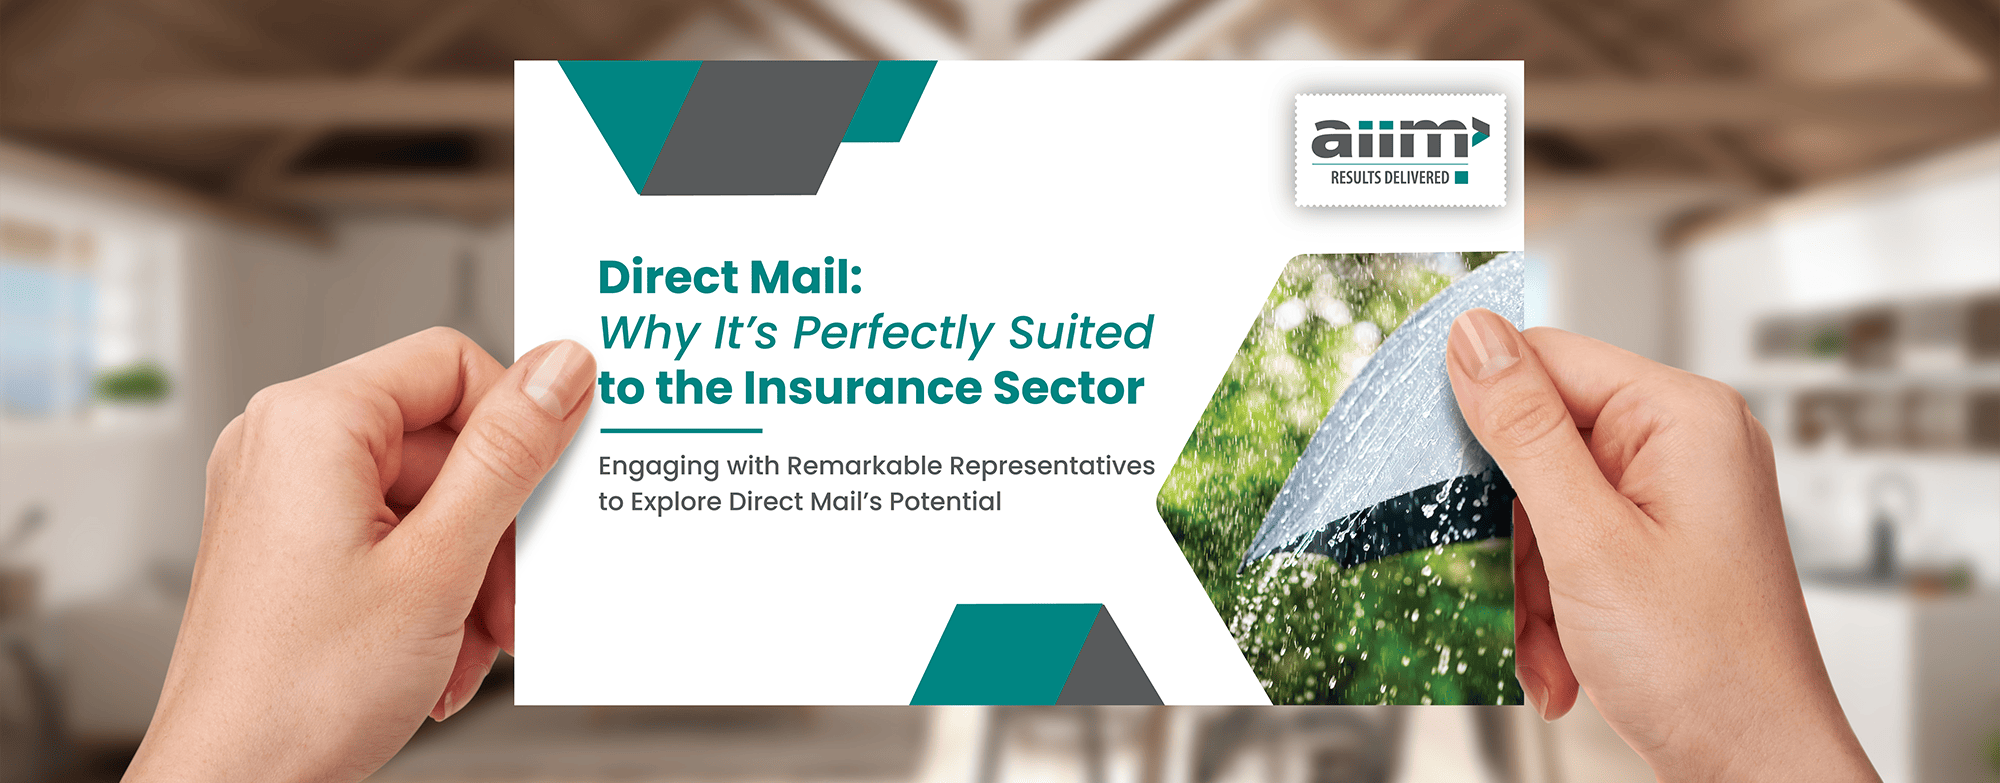 Direct mail - why it's perfectly suited to the insurance sector